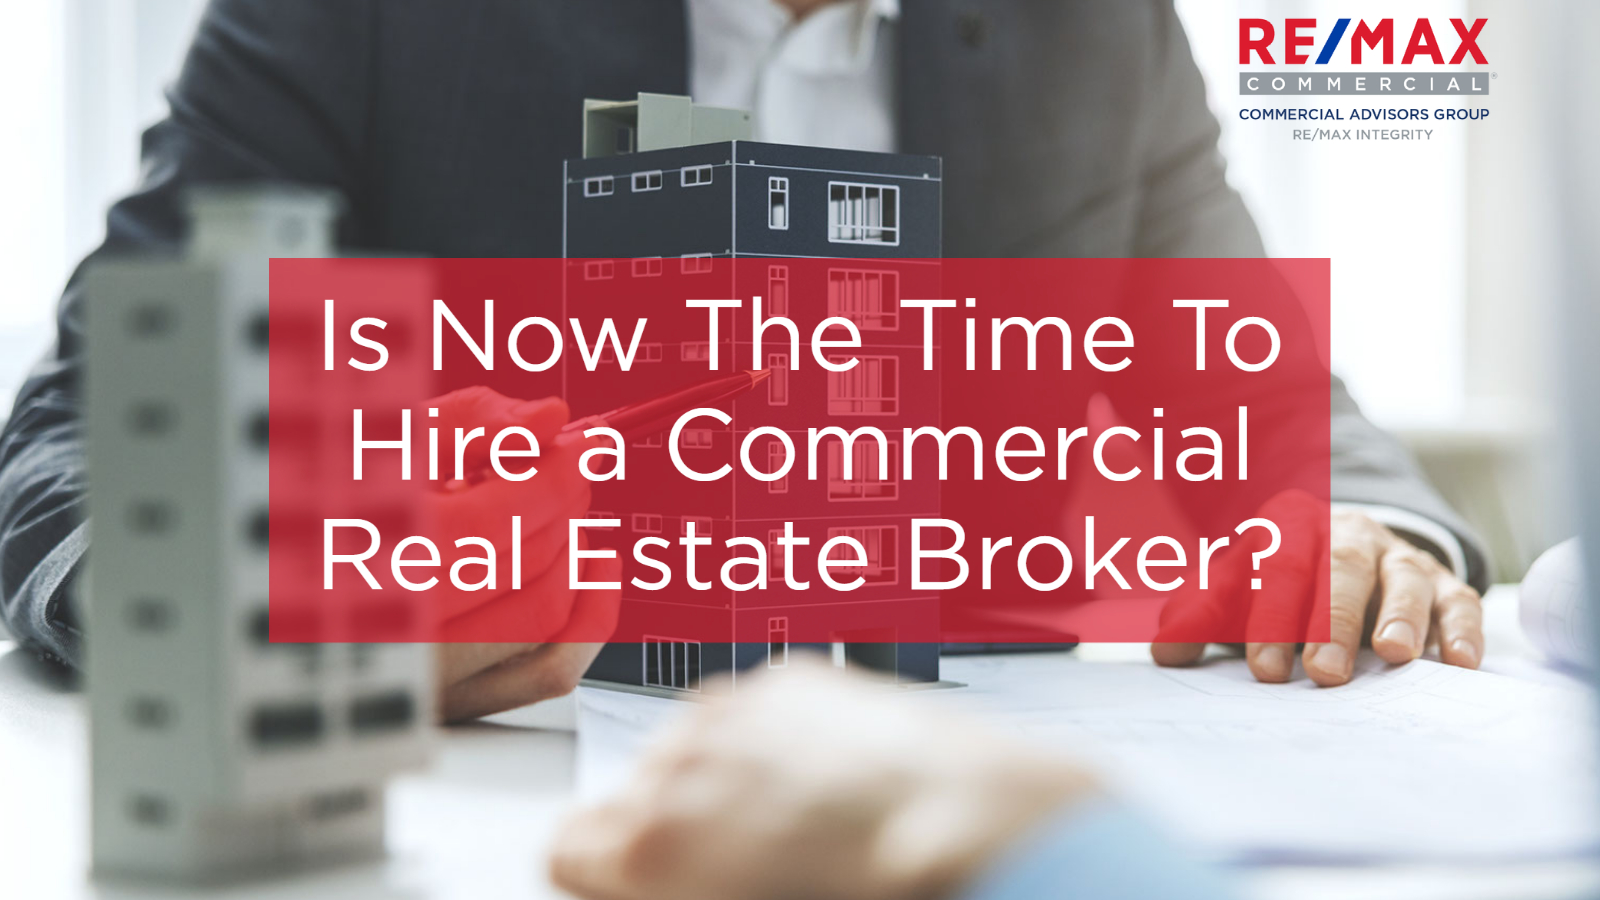 Is Now The Time To Hire a Commercial Real Estate Broker?